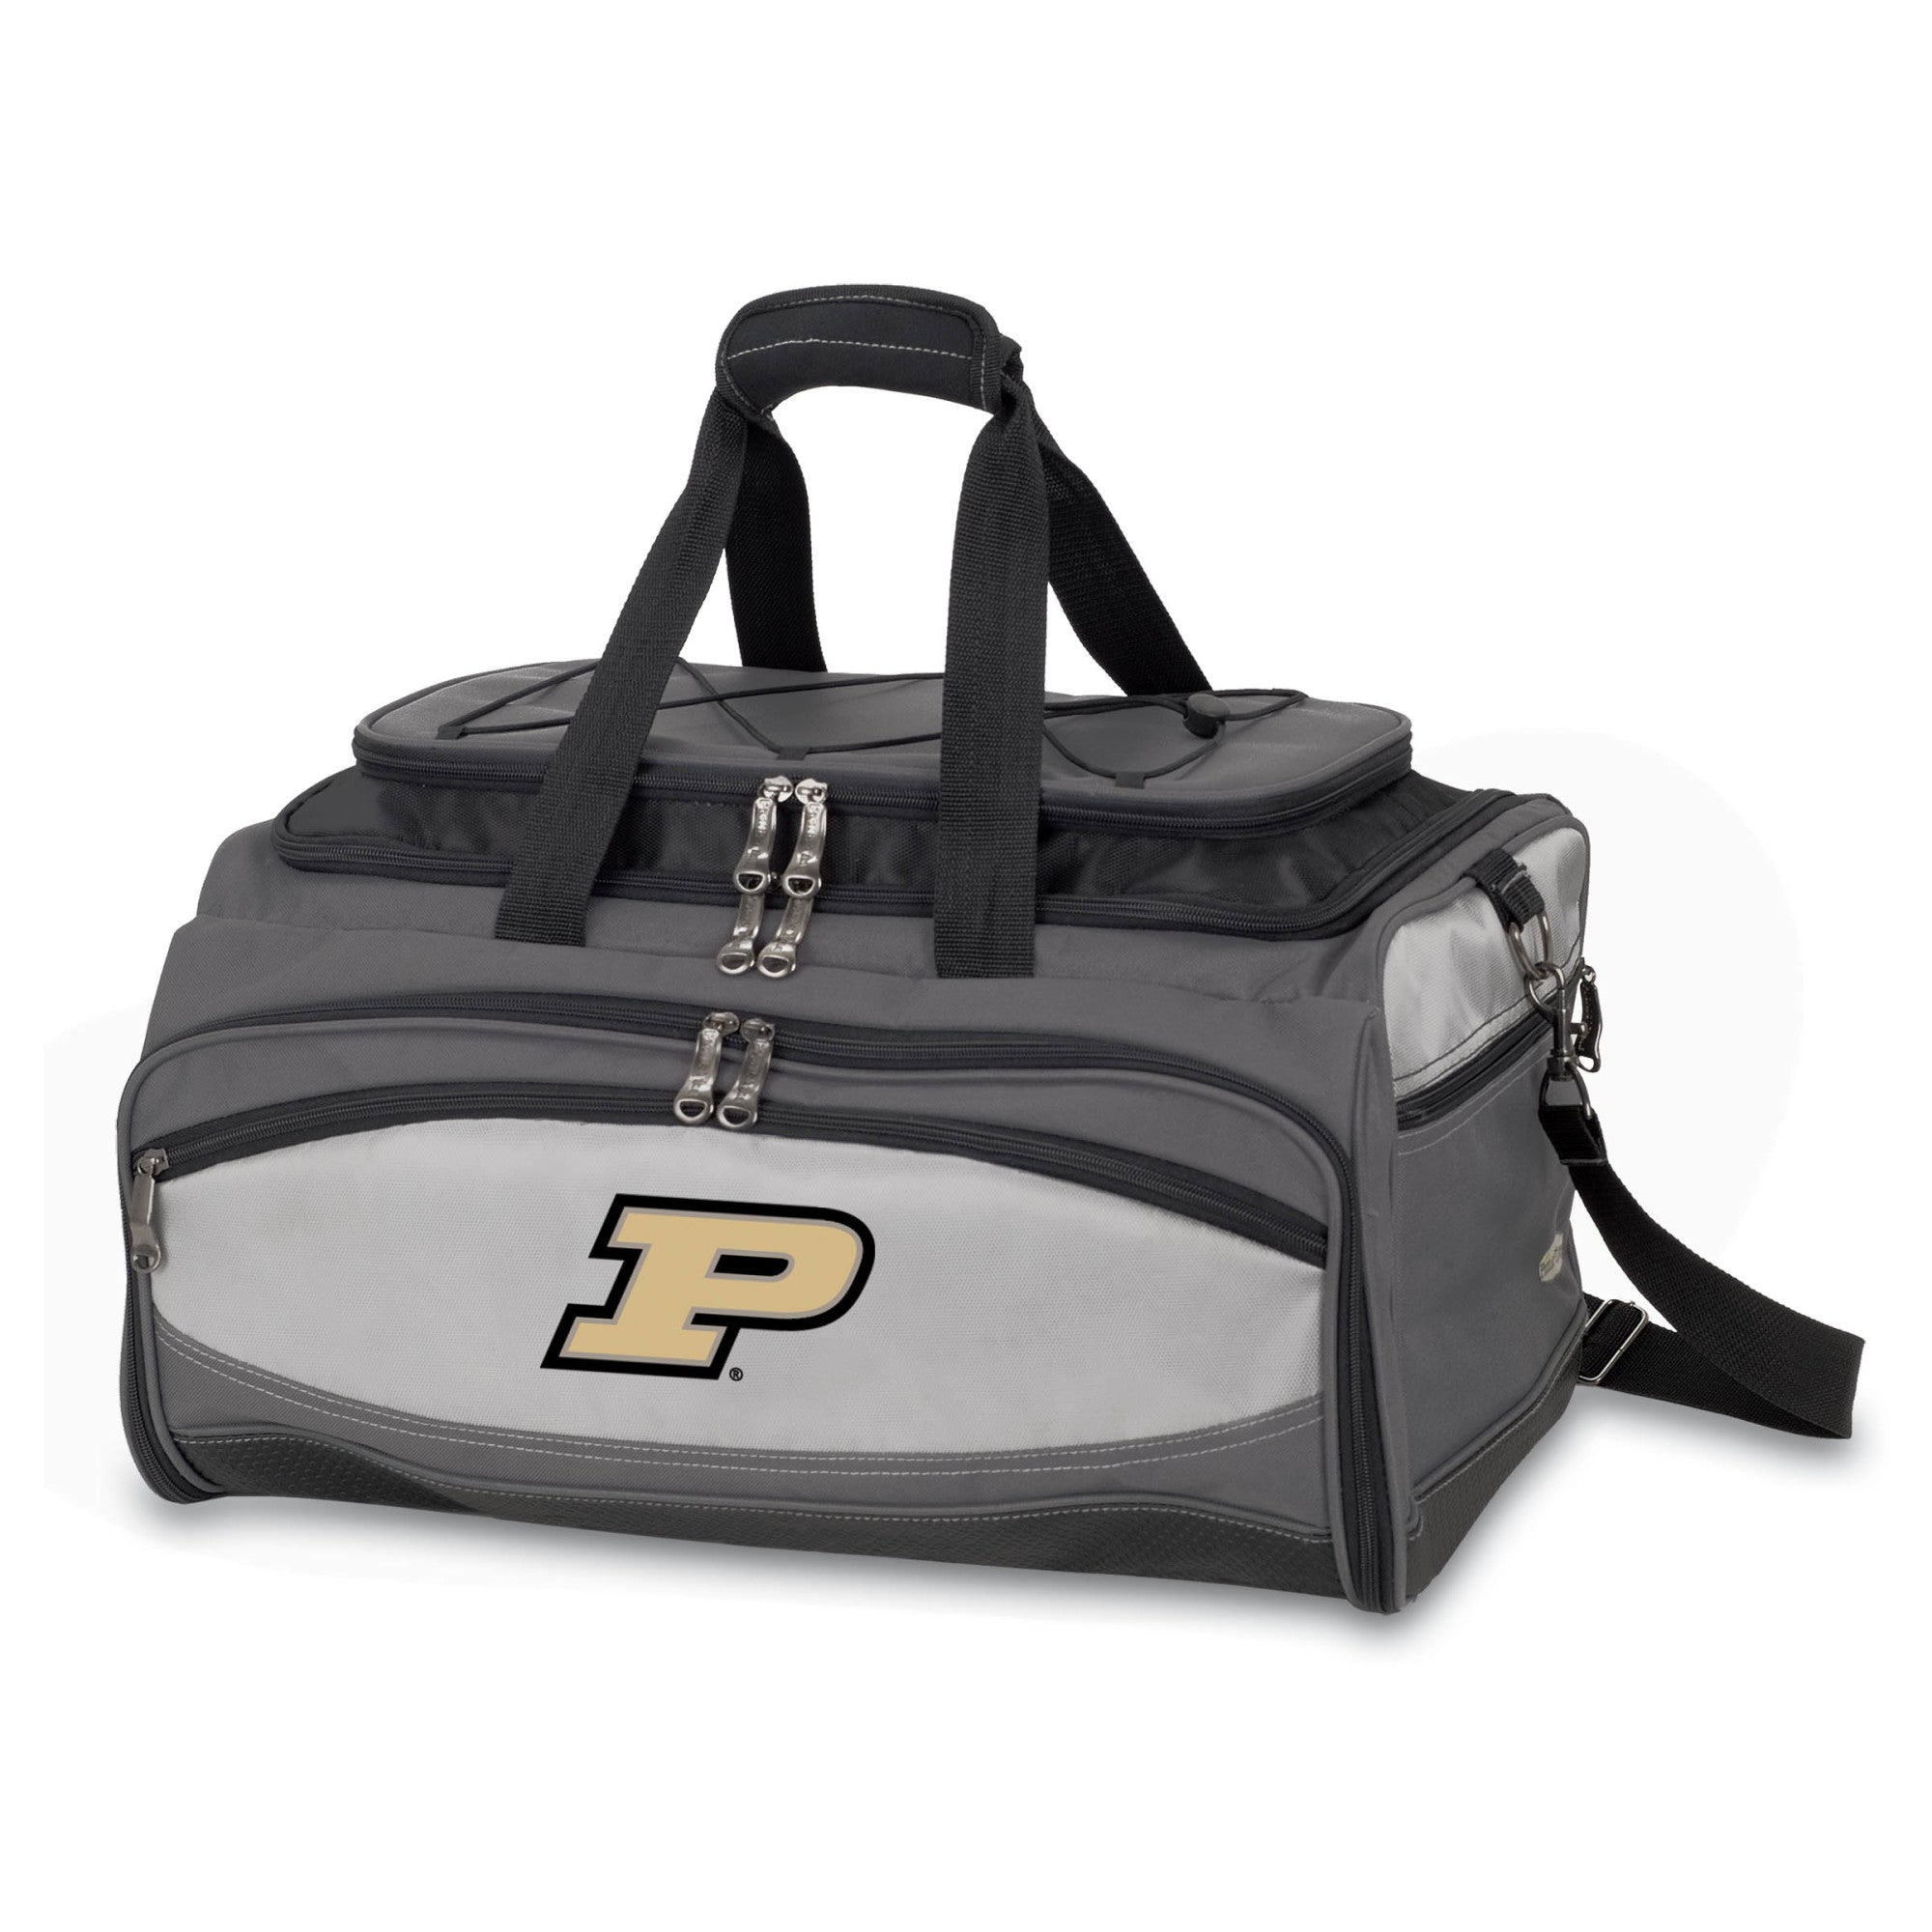 Purdue Boilermakers - Buccaneer Portable Charcoal Grill & Cooler Tote, (Black with Gray Accents)